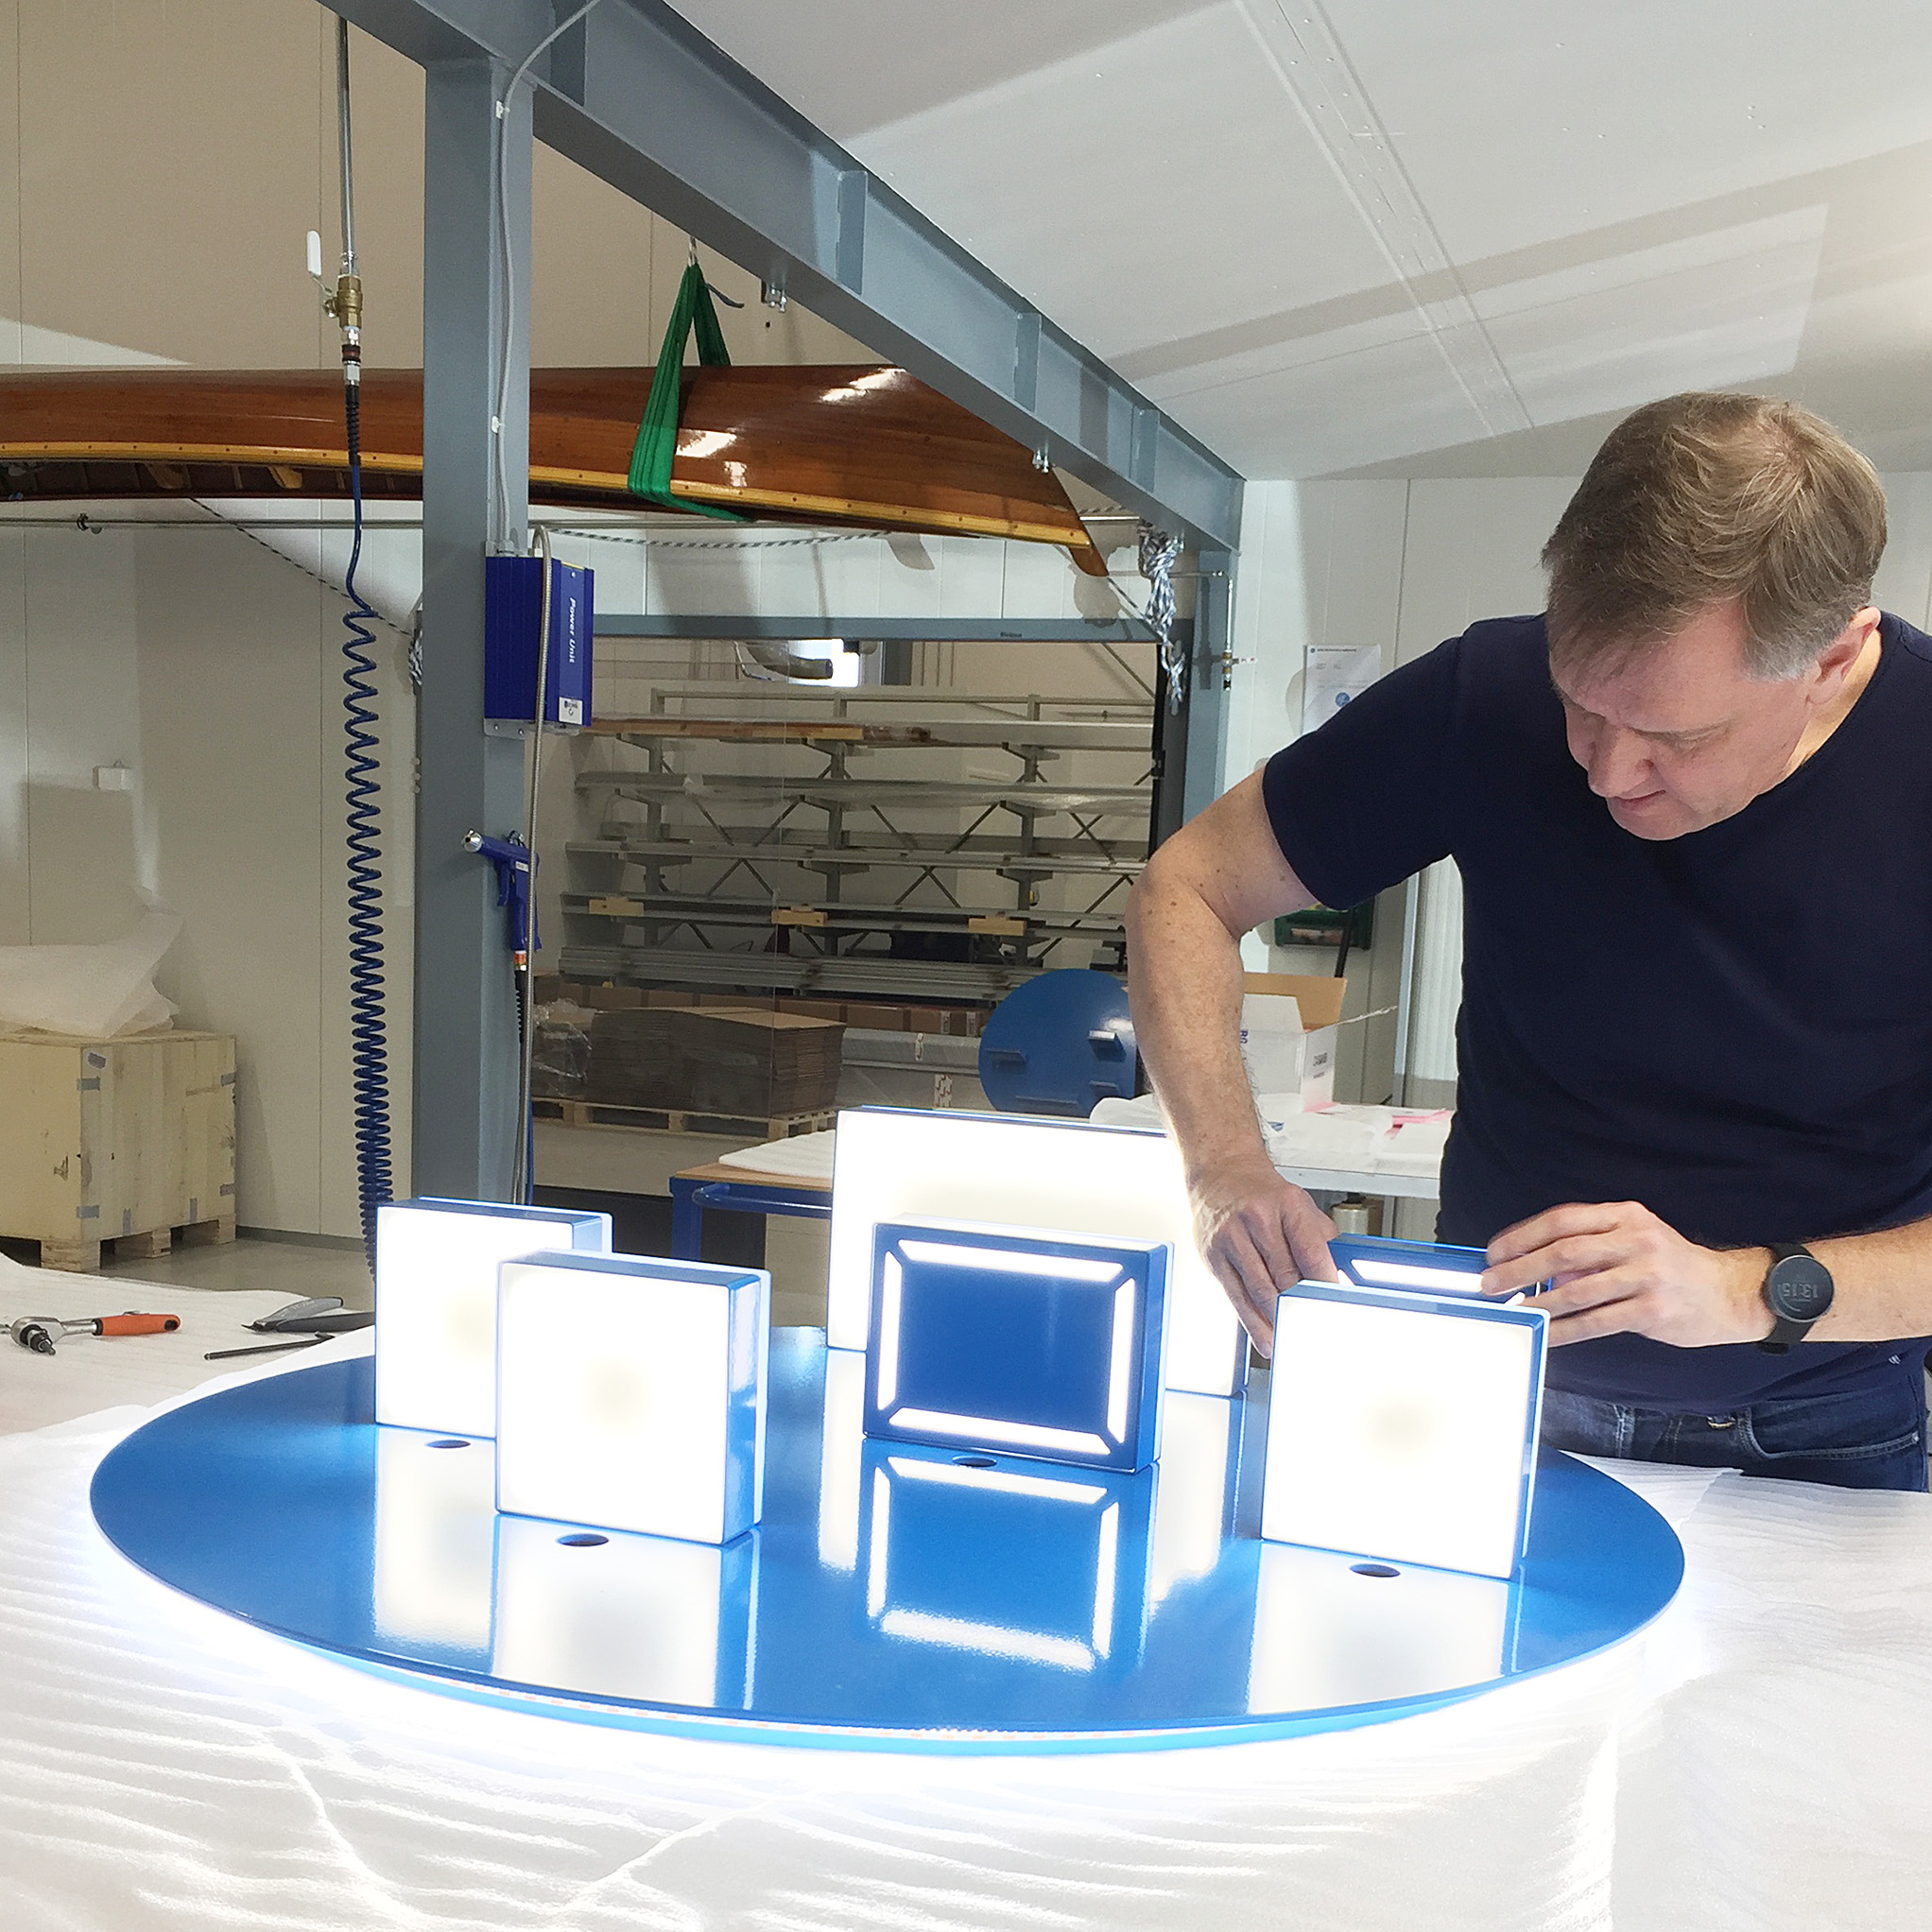 The bright display furniture is assembled and finished in production at the AICCI factory.